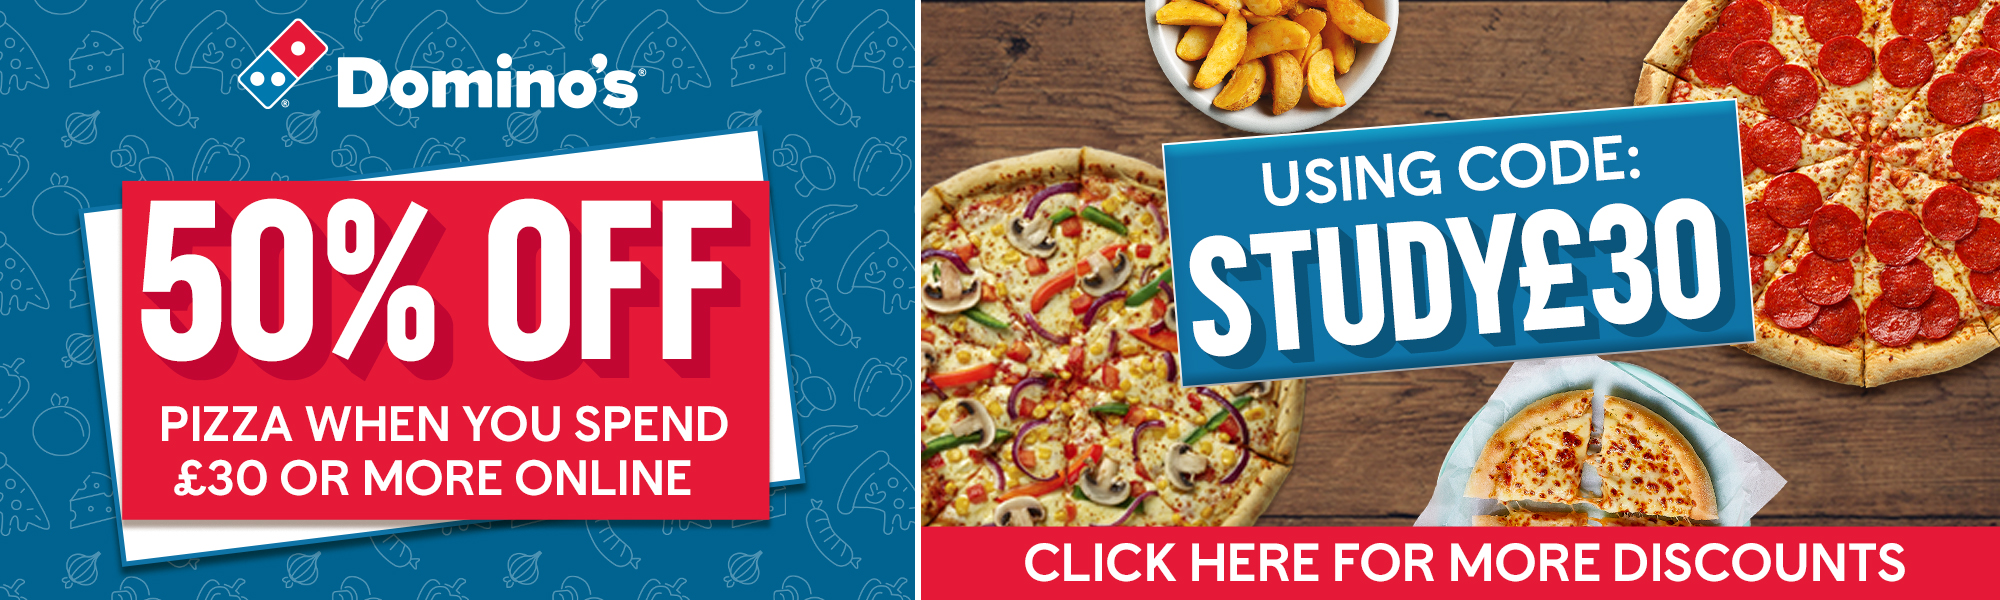 Domino's - 50% off pizza when you spend £30 or more online using code: STUDY£30